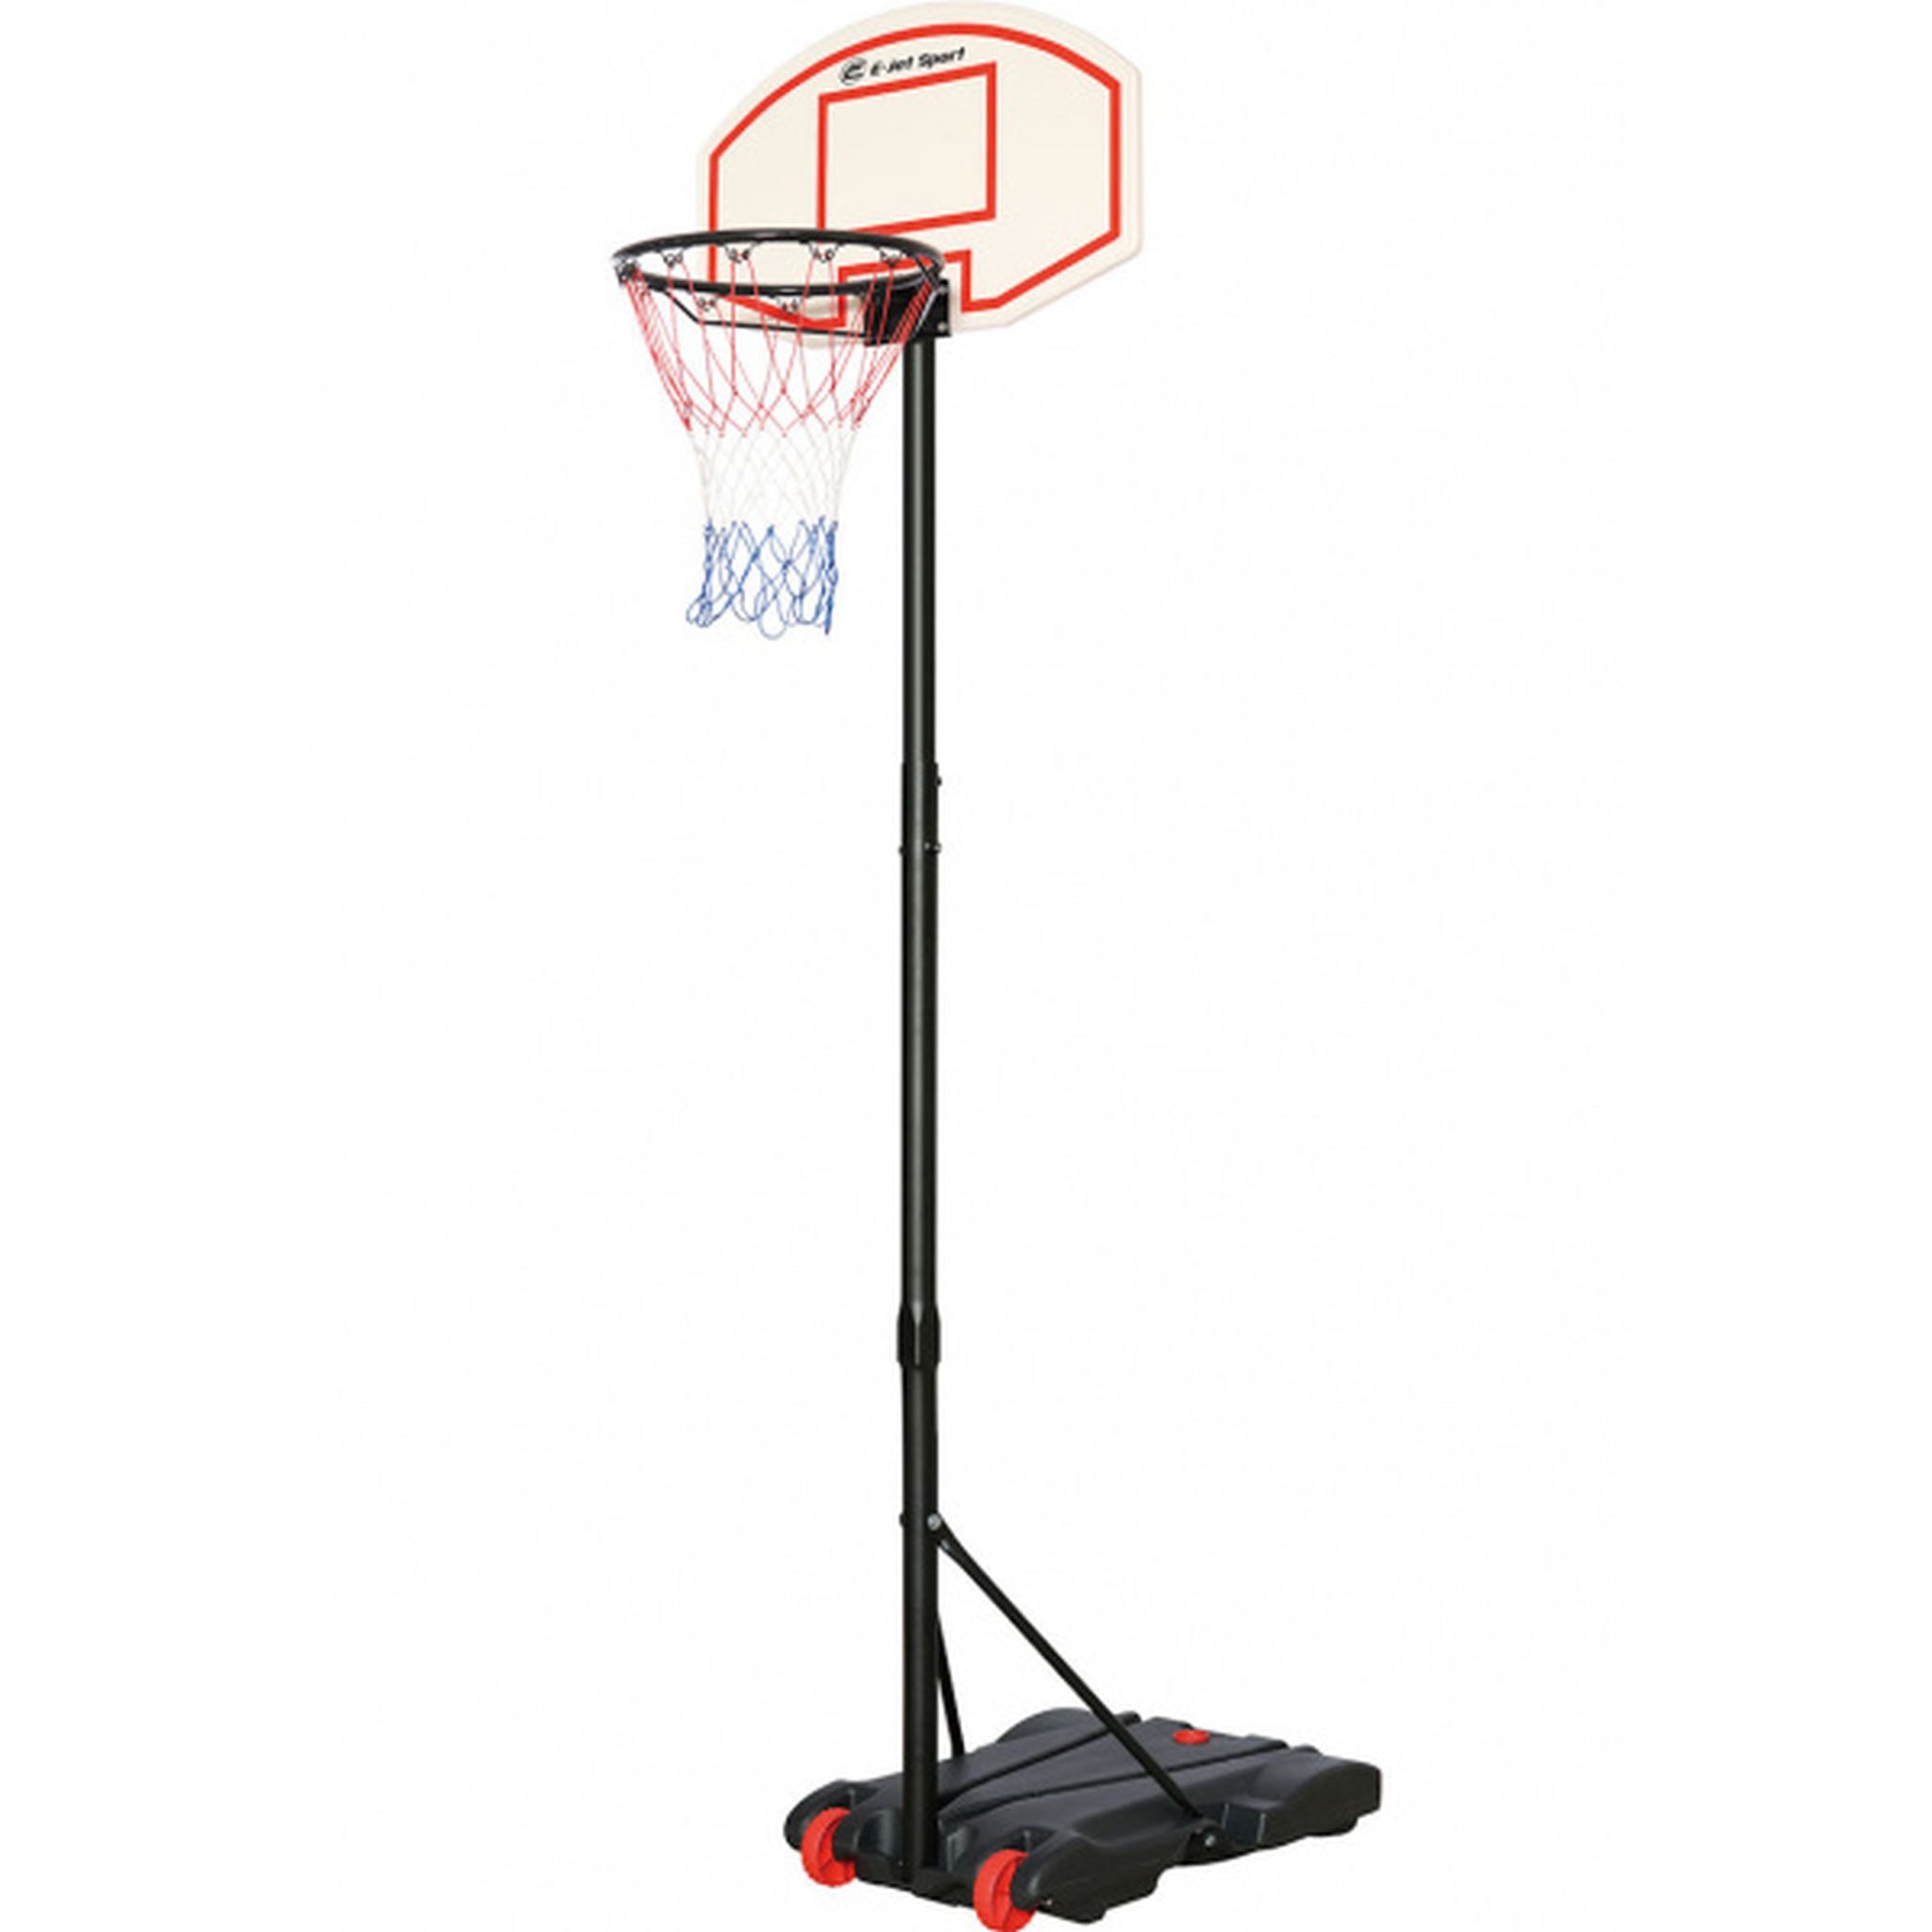 E-Jet Youth Portable Basketball System